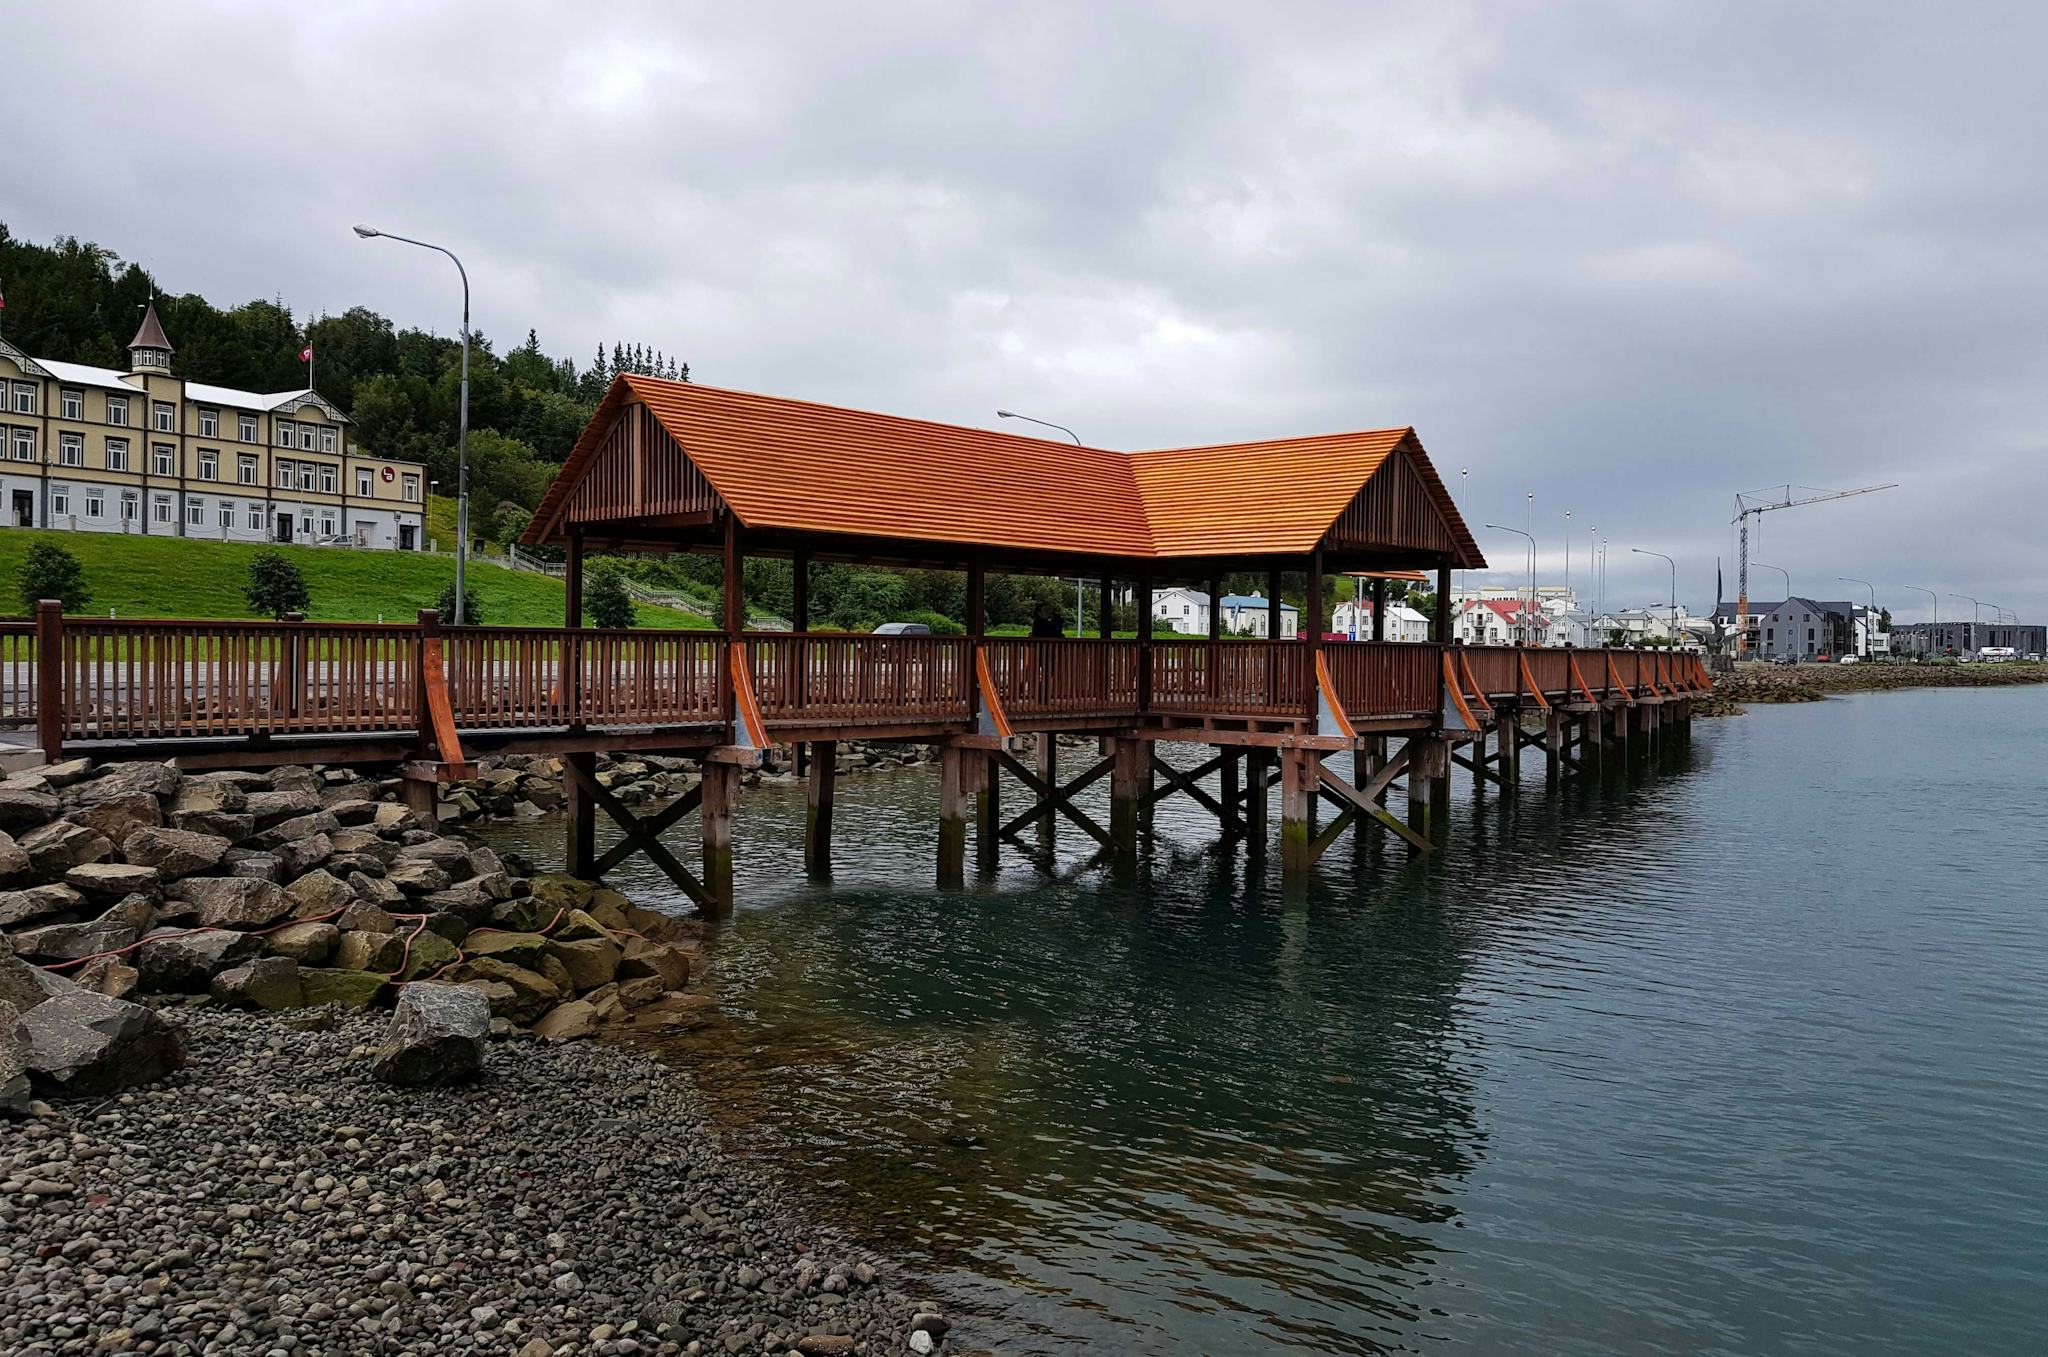 Wooden pedestrian bridge with distinctive roof by the water